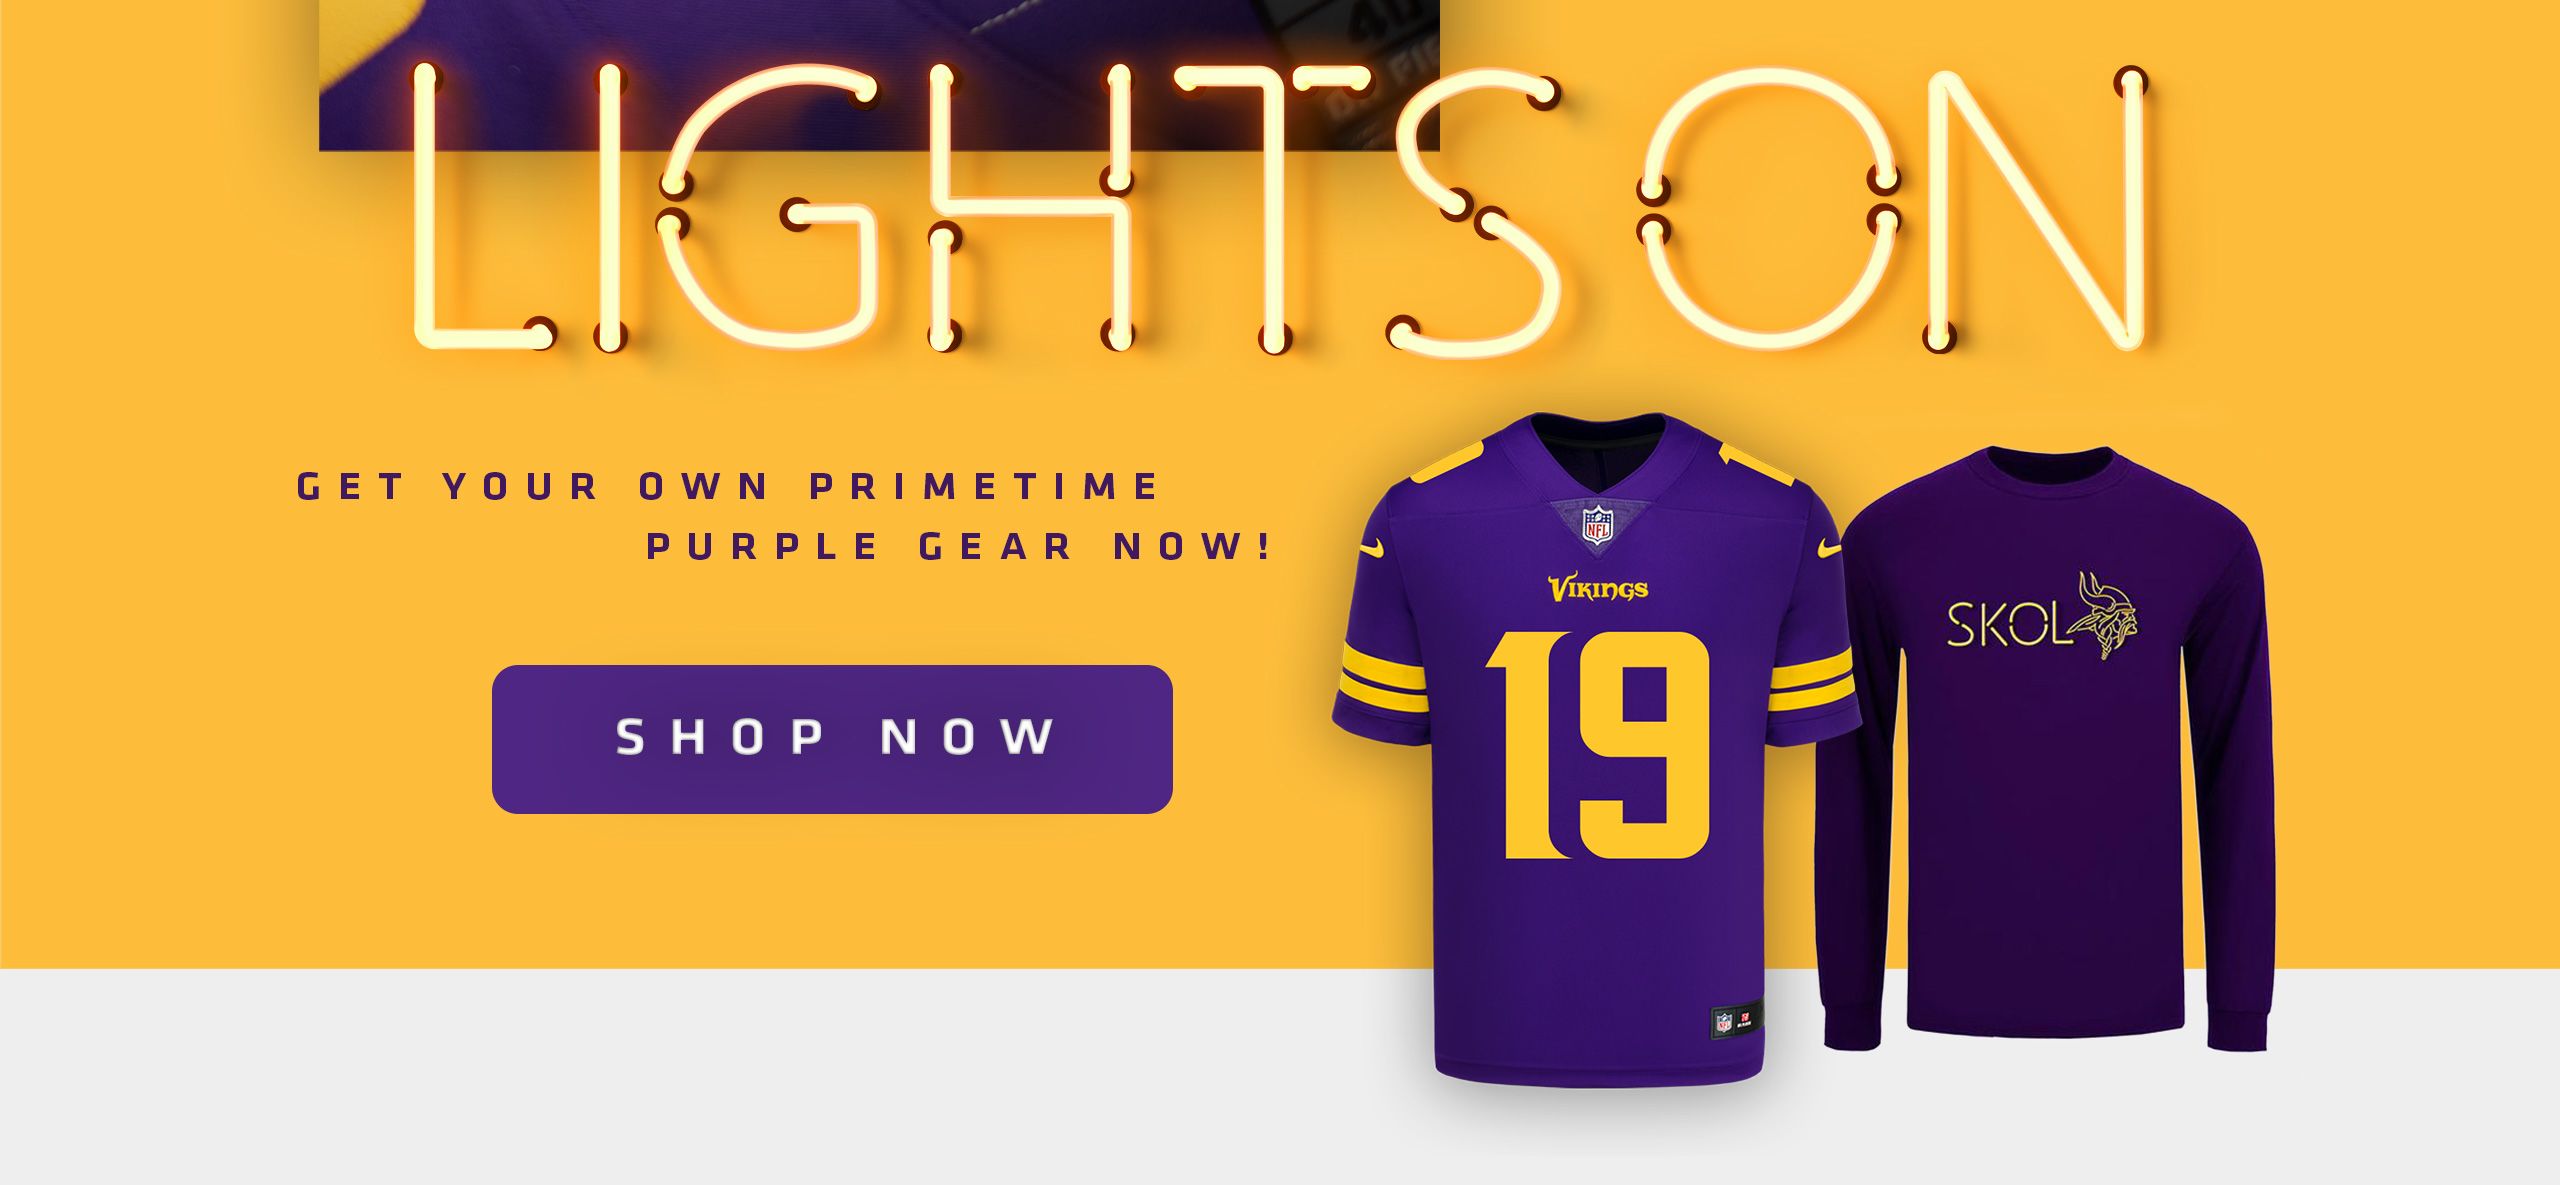 what color jersey do the minnesota vikings wear